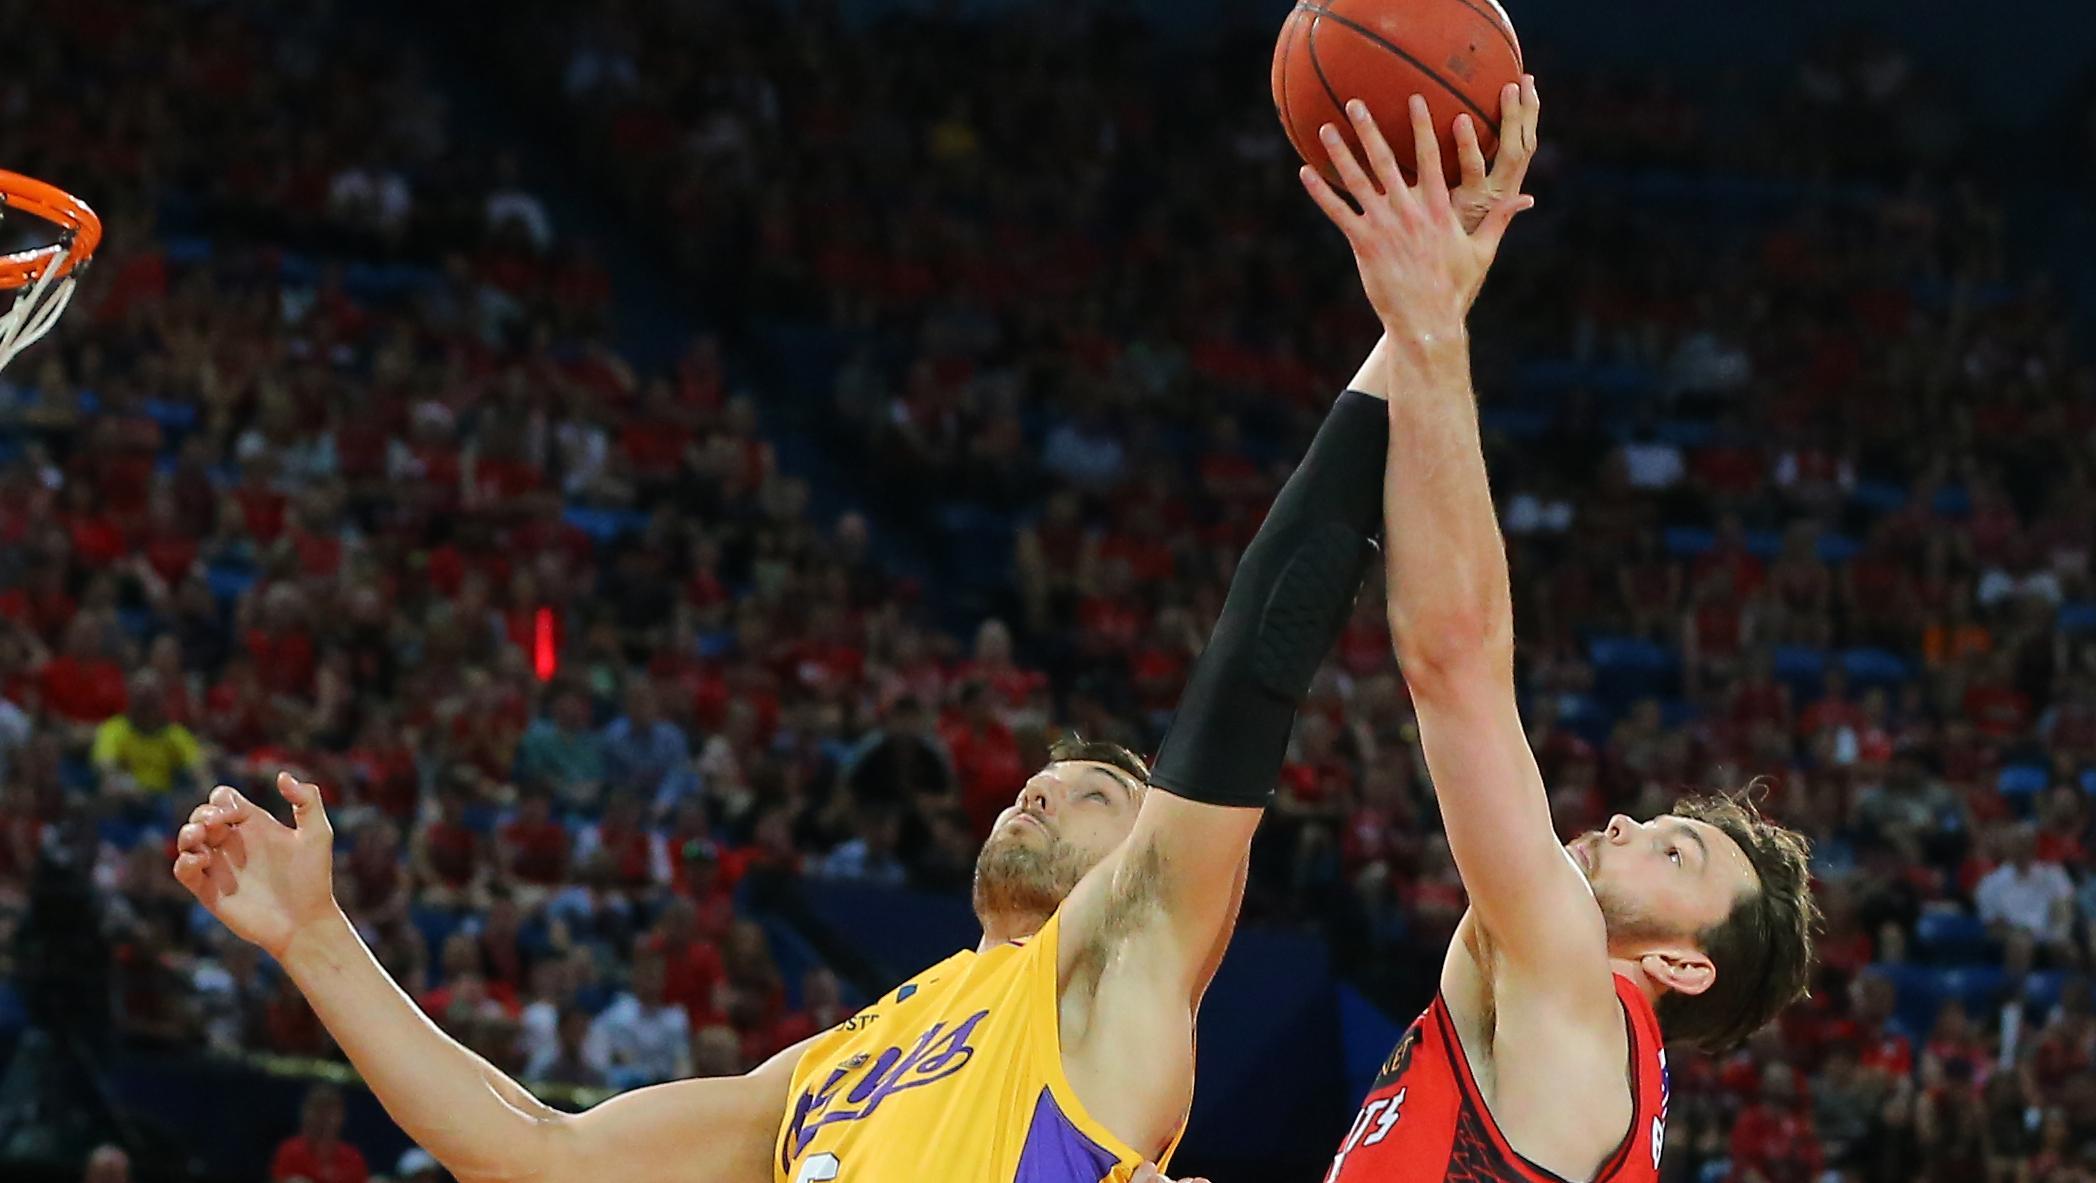 Andrew Bogut overcomes boos and tough night to get last laugh